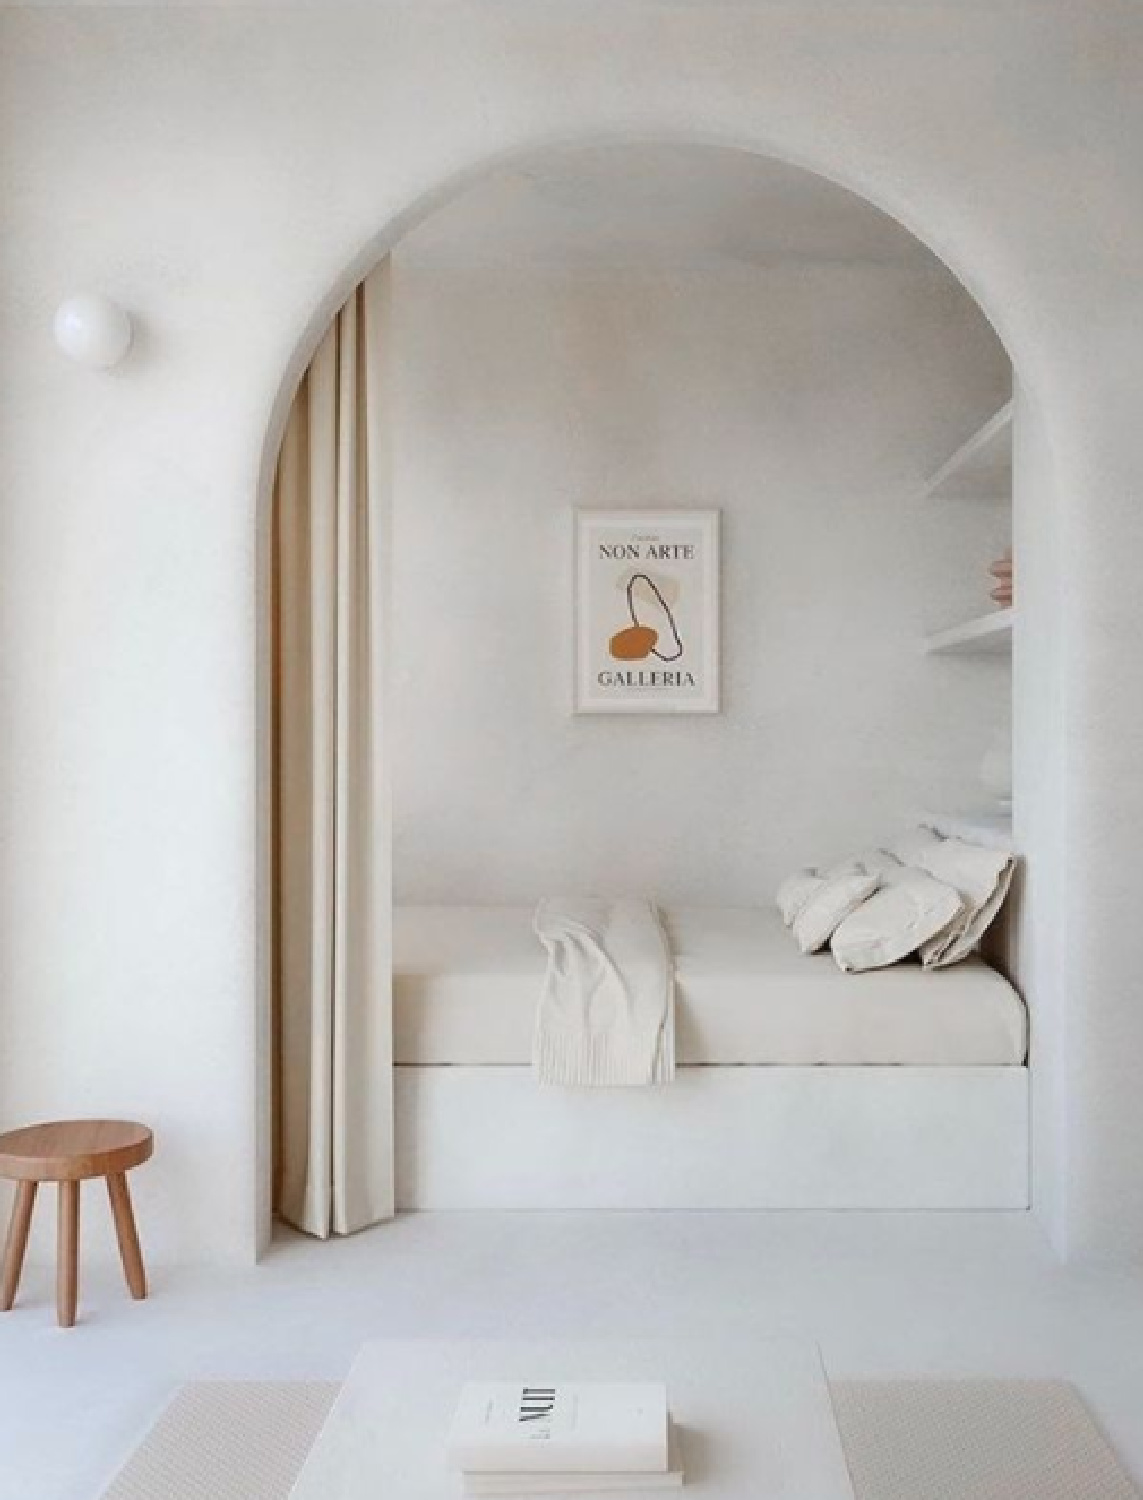 Beautiful serene bedroom with arched nook and creamy plaster - an airbnb in Biarritz - @oursroux.